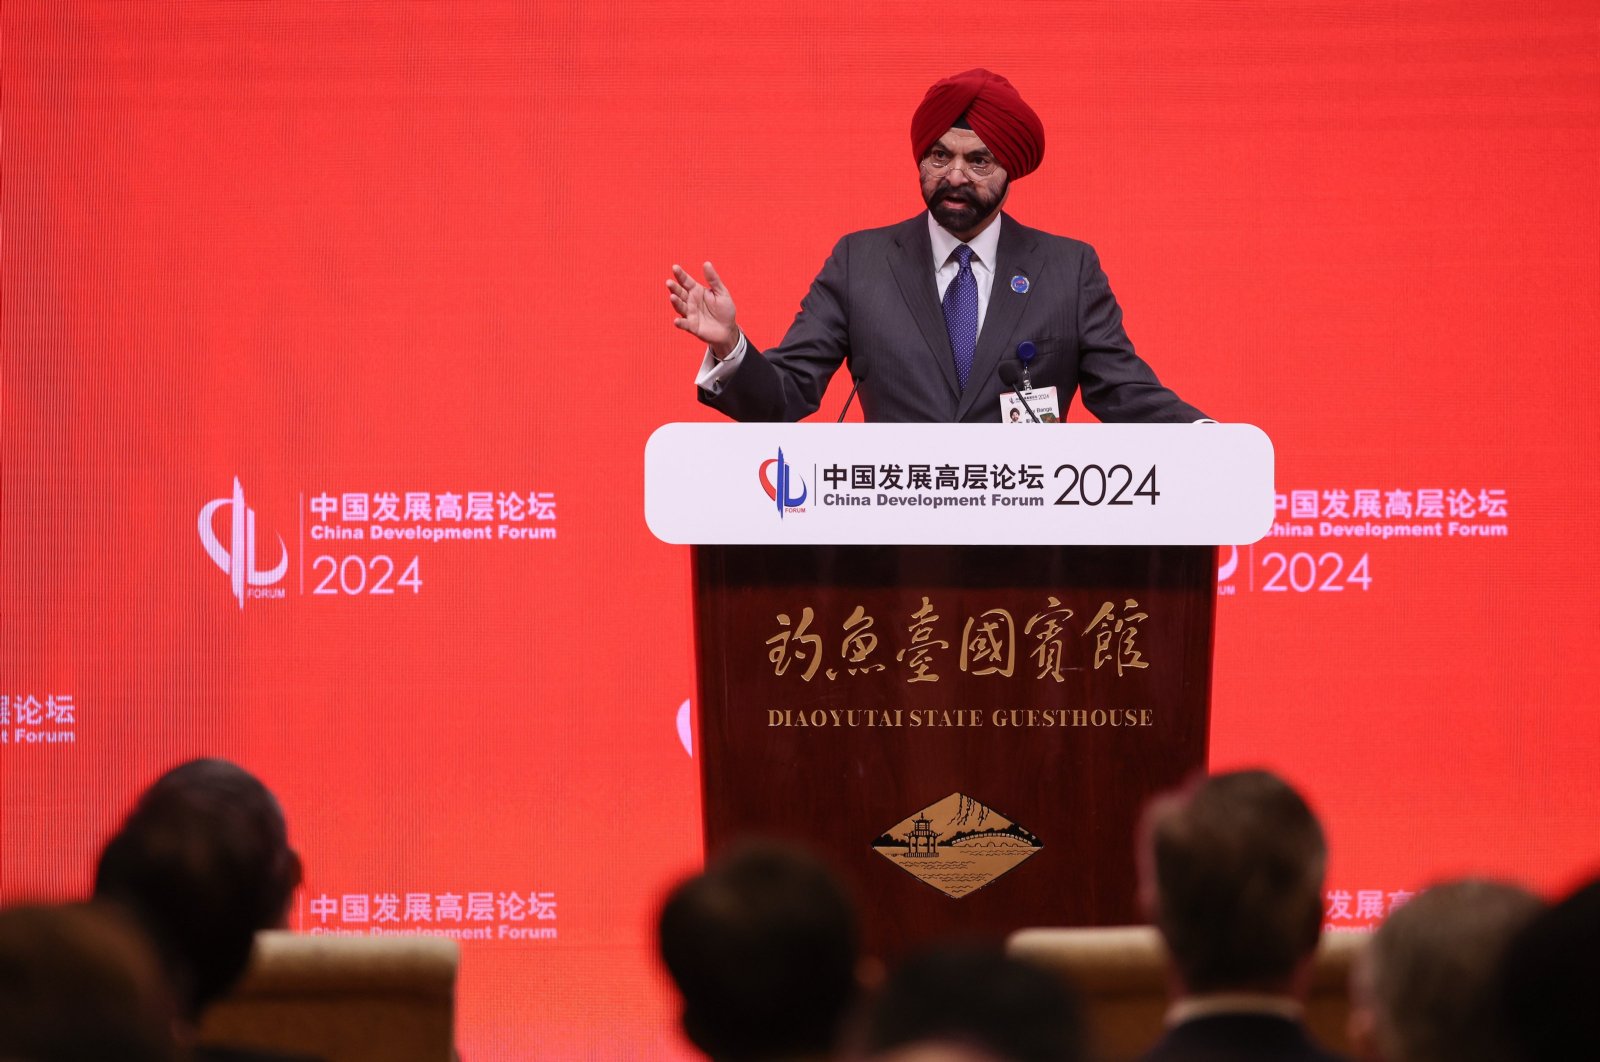 Ajay Banga, head of the World Bank Group, delivers a speech during the annual meeting of the China Development Forum at the Diaoyutai Guesthouse, Beijing, China, March 24, 2024.